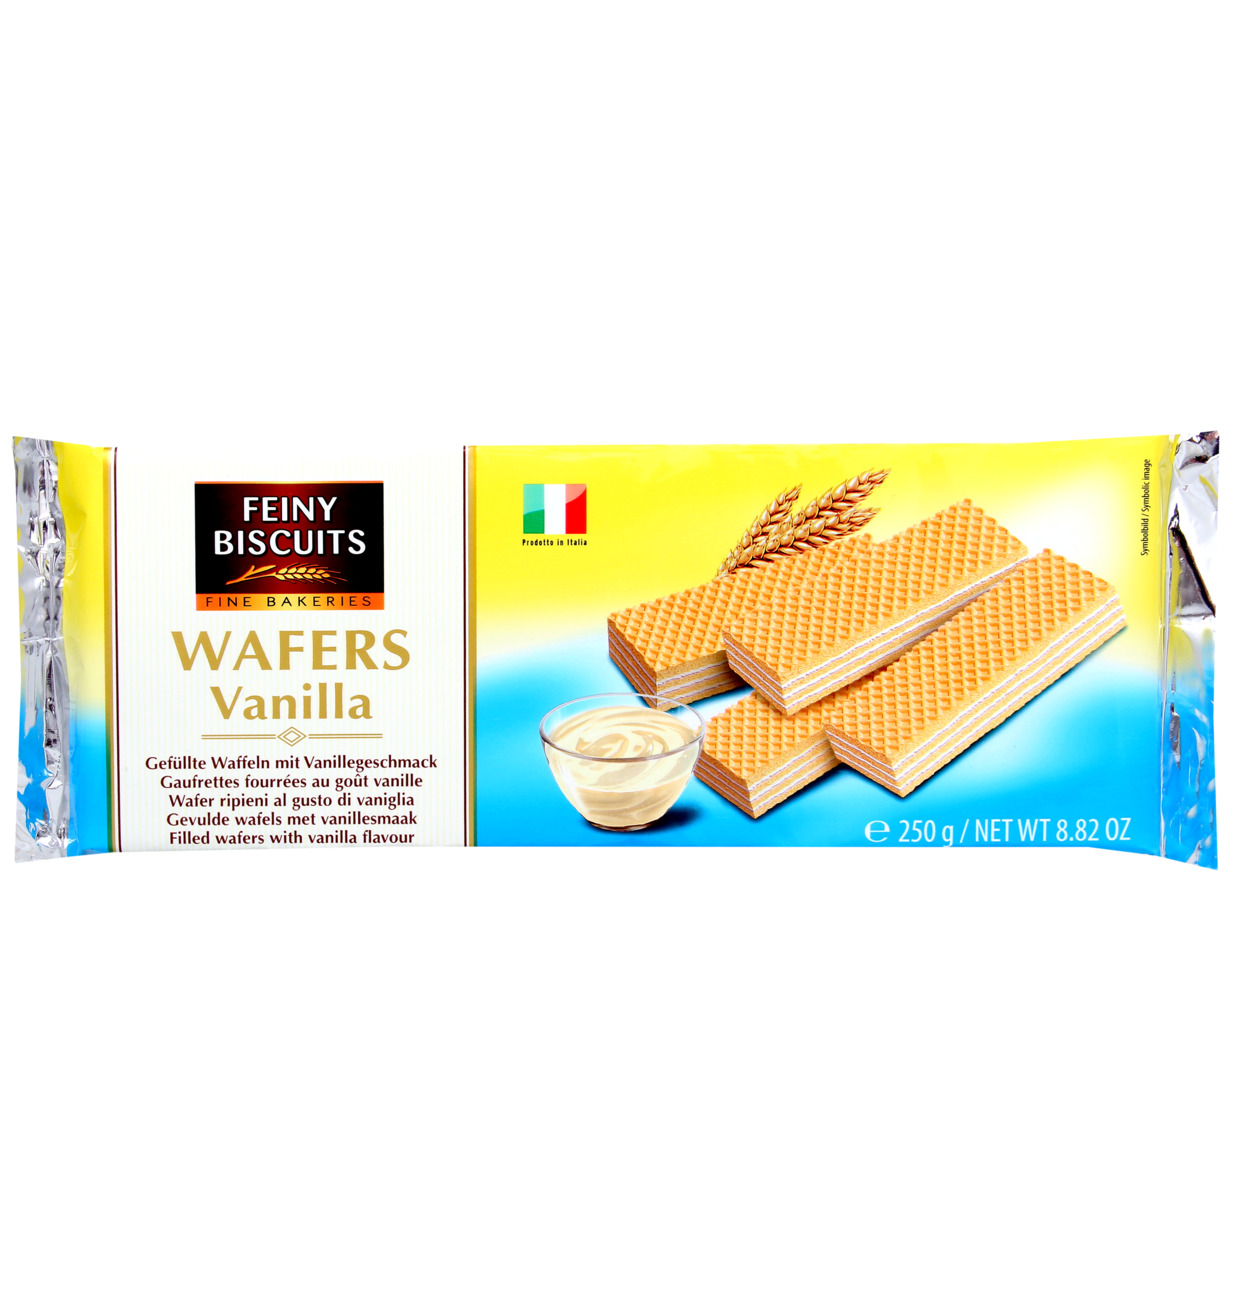 Feiny Biscuits &#1042;&#1072;&#1092;&#1083;&#1080; &#1089; &#1074;&#1072;&#1085;&#1080;&#1083;&#1100;&#1085;&#1086;&#1081; &#1085;&#1072;&#1095;&#1080;&#1085;&#1082;&#1086;&#1081; 250&#1075;
